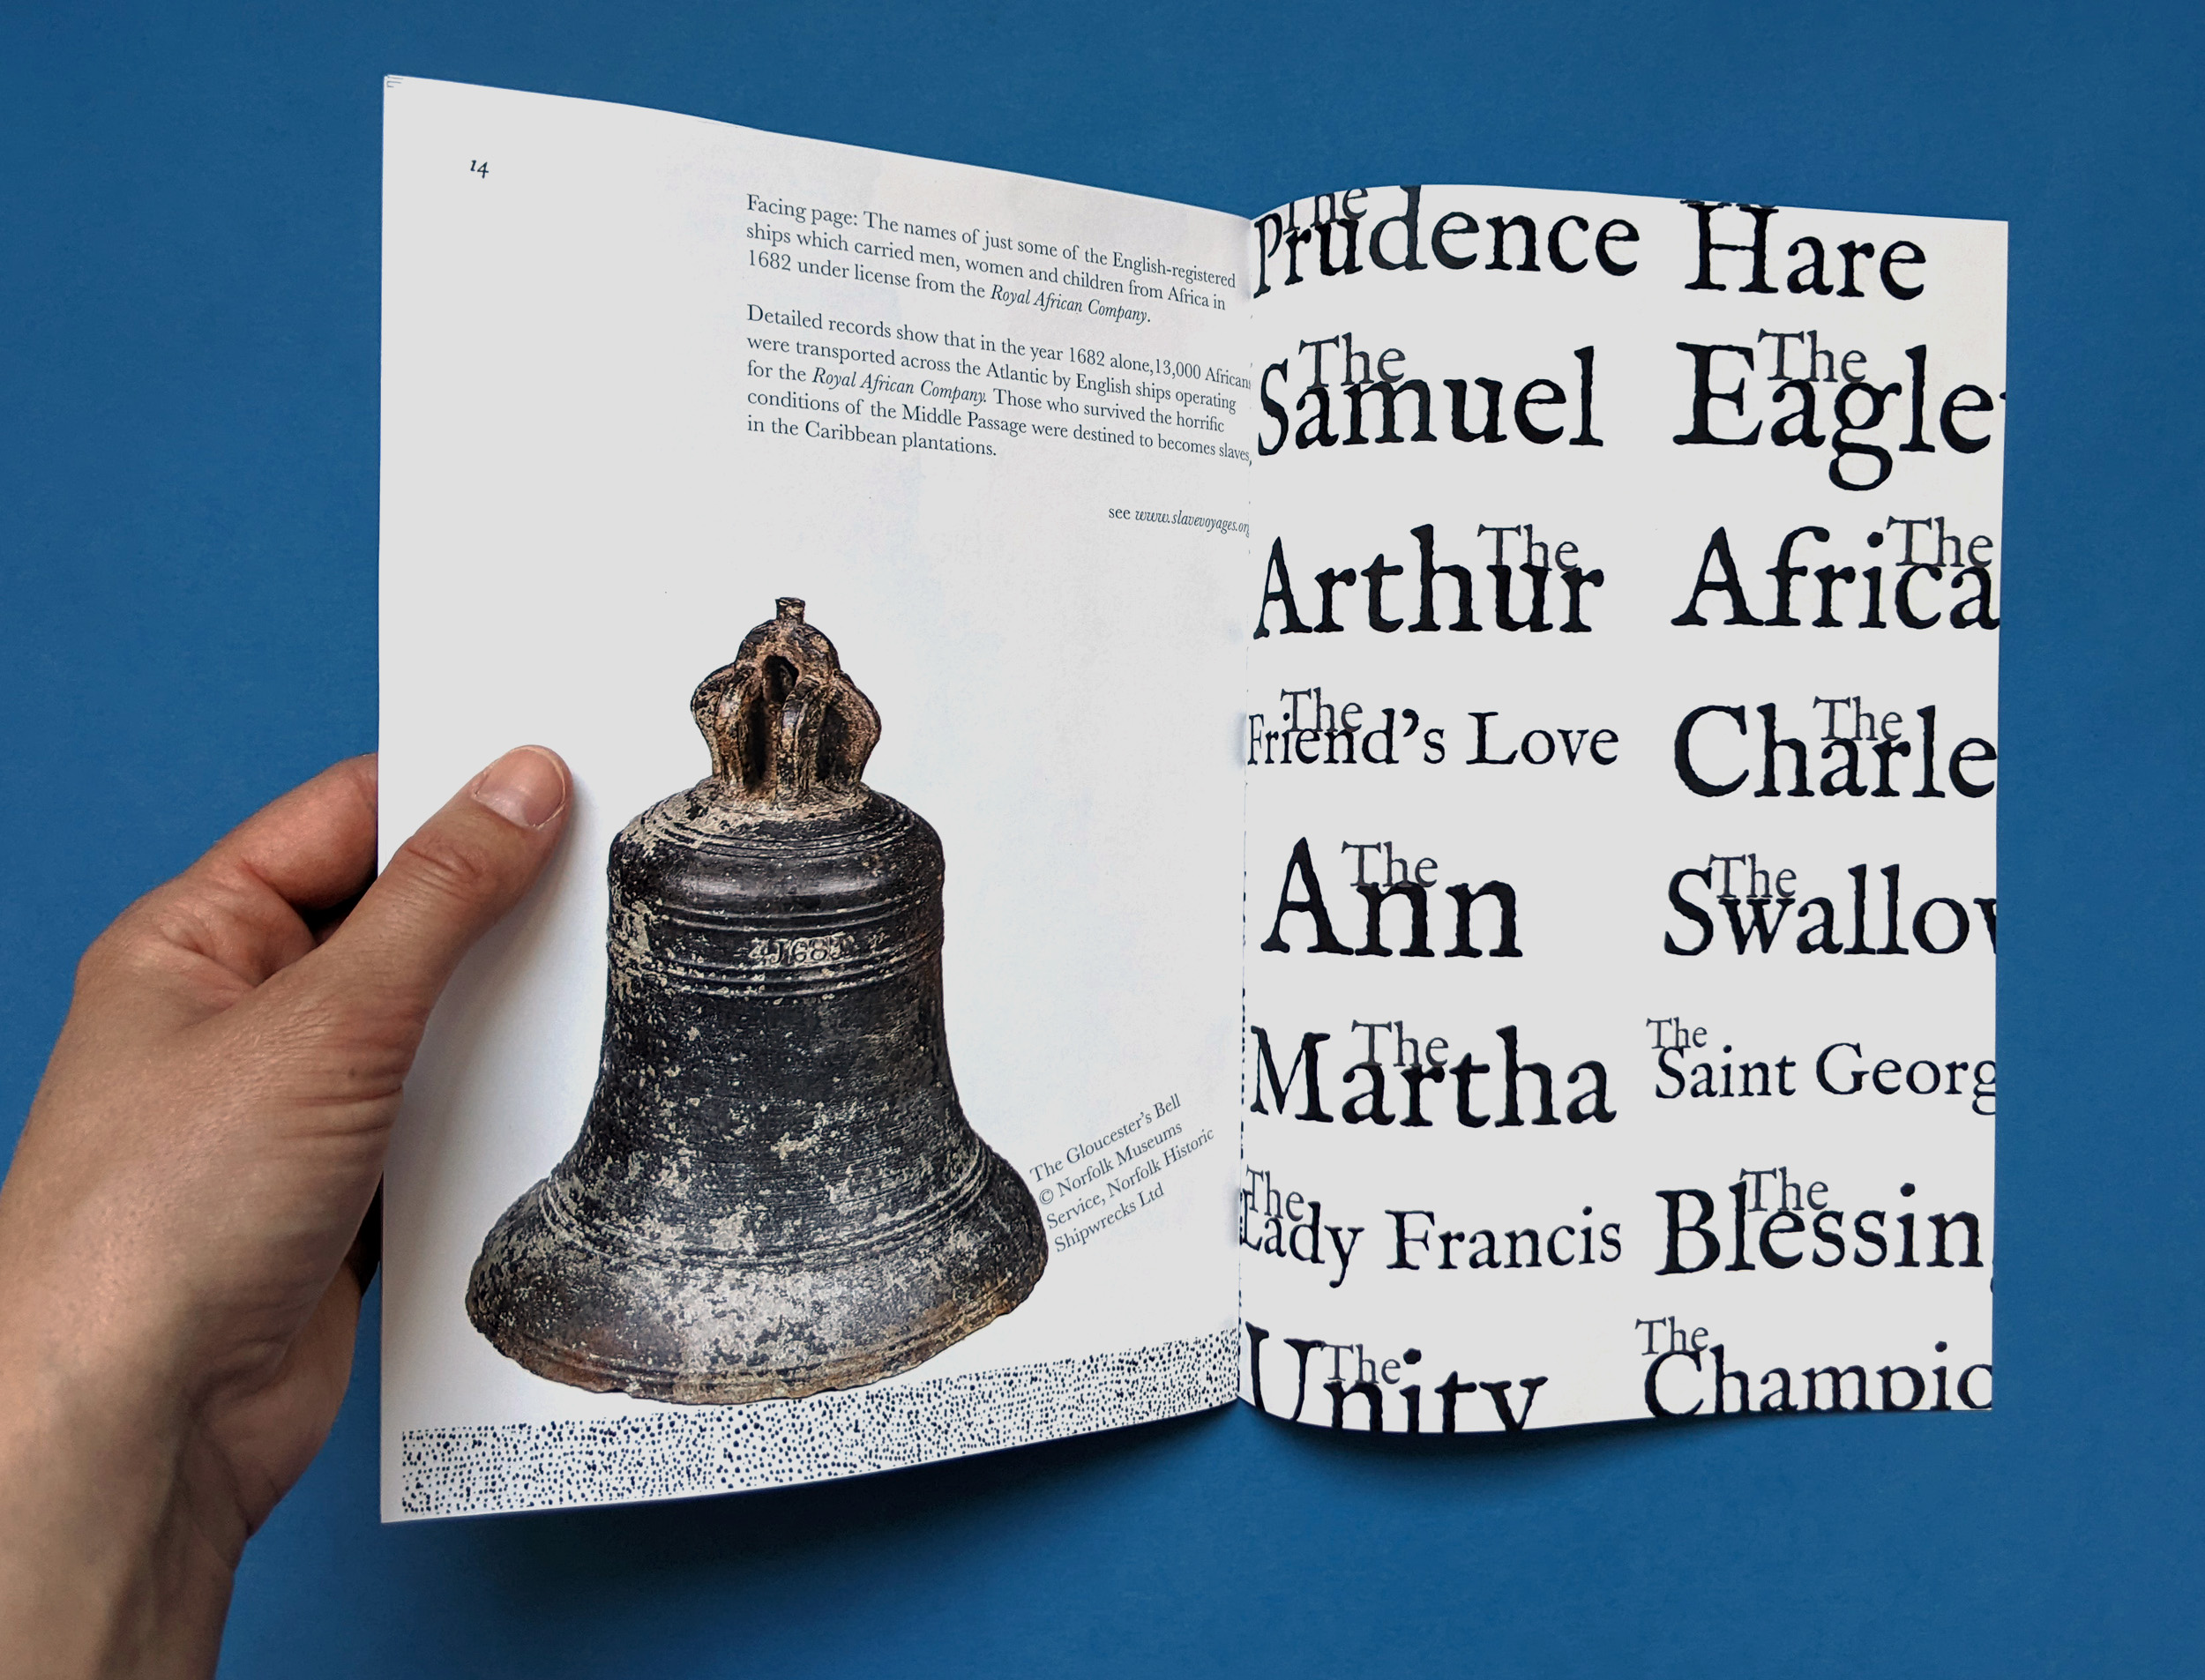 An A6 zine is open to the final double page spread, which shows a photograph of the original ship’s bell recovered from the Gloucester shipwreck opposite the names of ships operated by the Royal African Company in the year the ship sank.